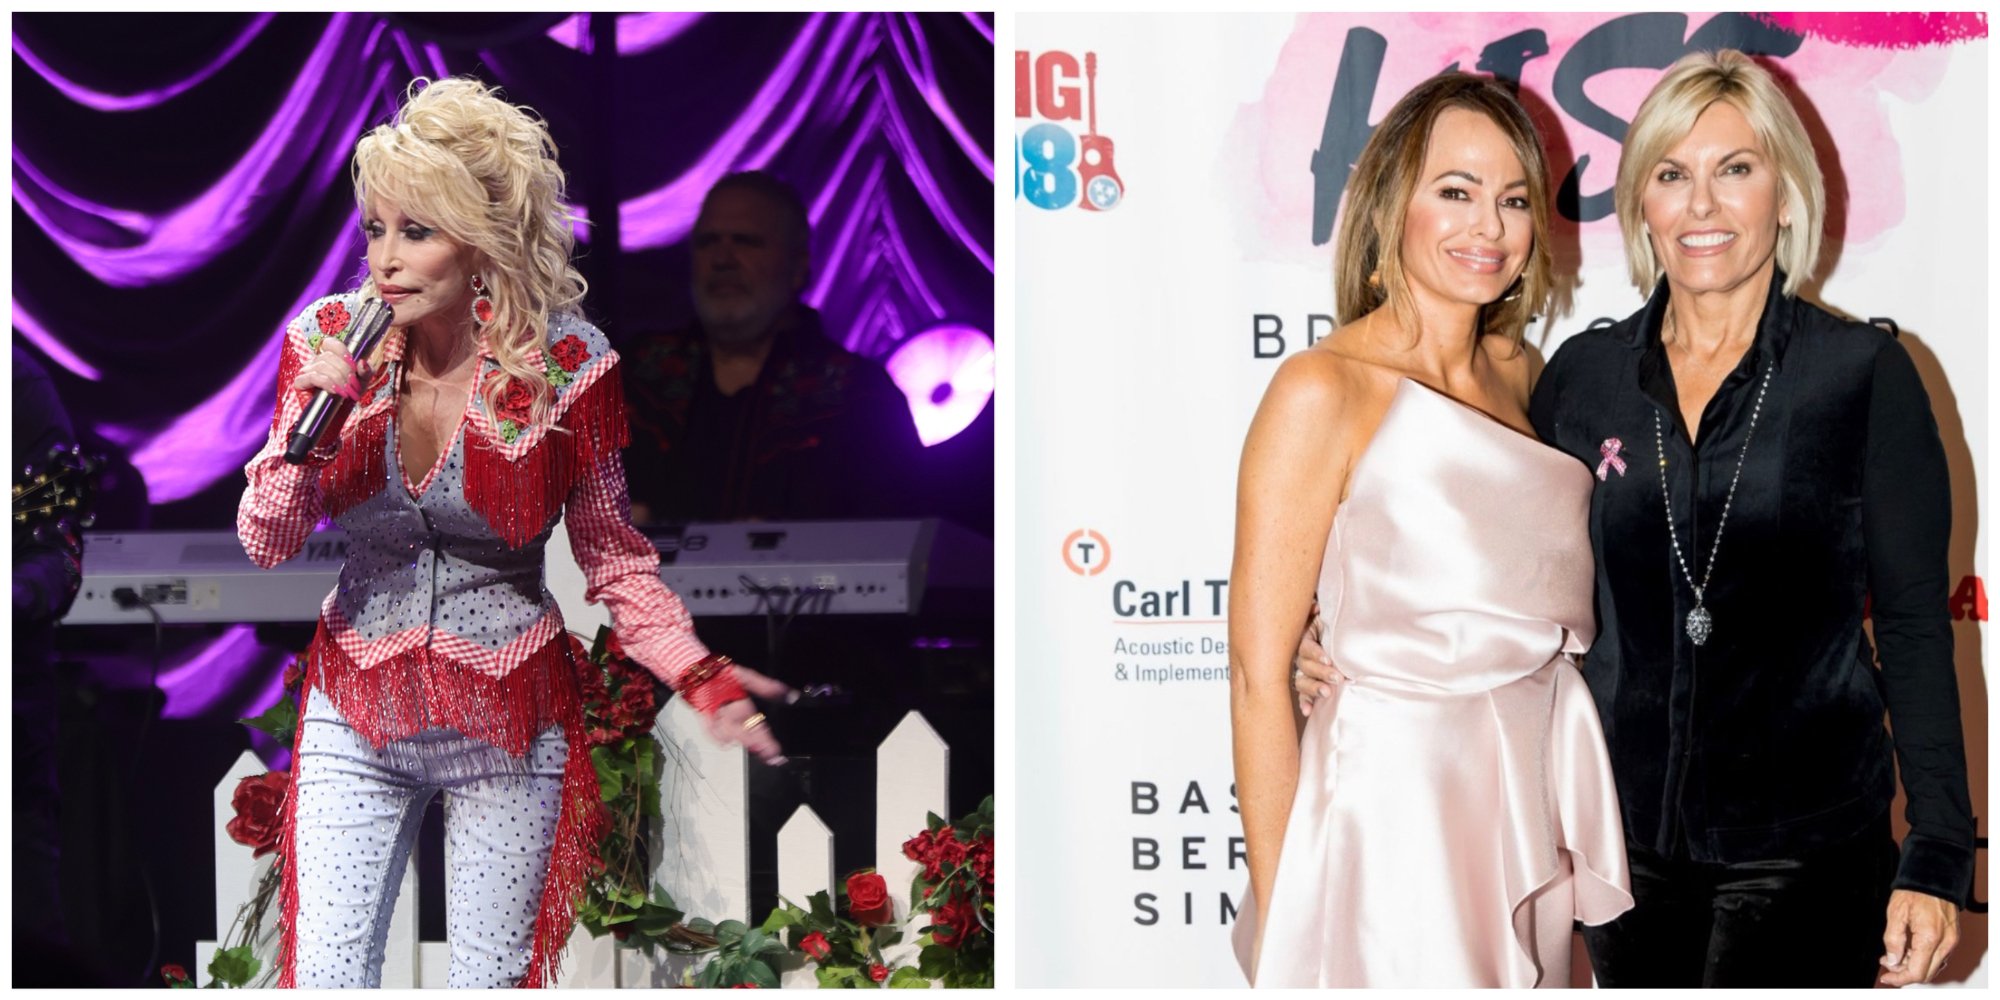 Dolly Parton performs at SXSW and stands onstage with a microphone. Leah Shafer and Captain Sandy Yawn appeared at an event and smile on step and repeat.